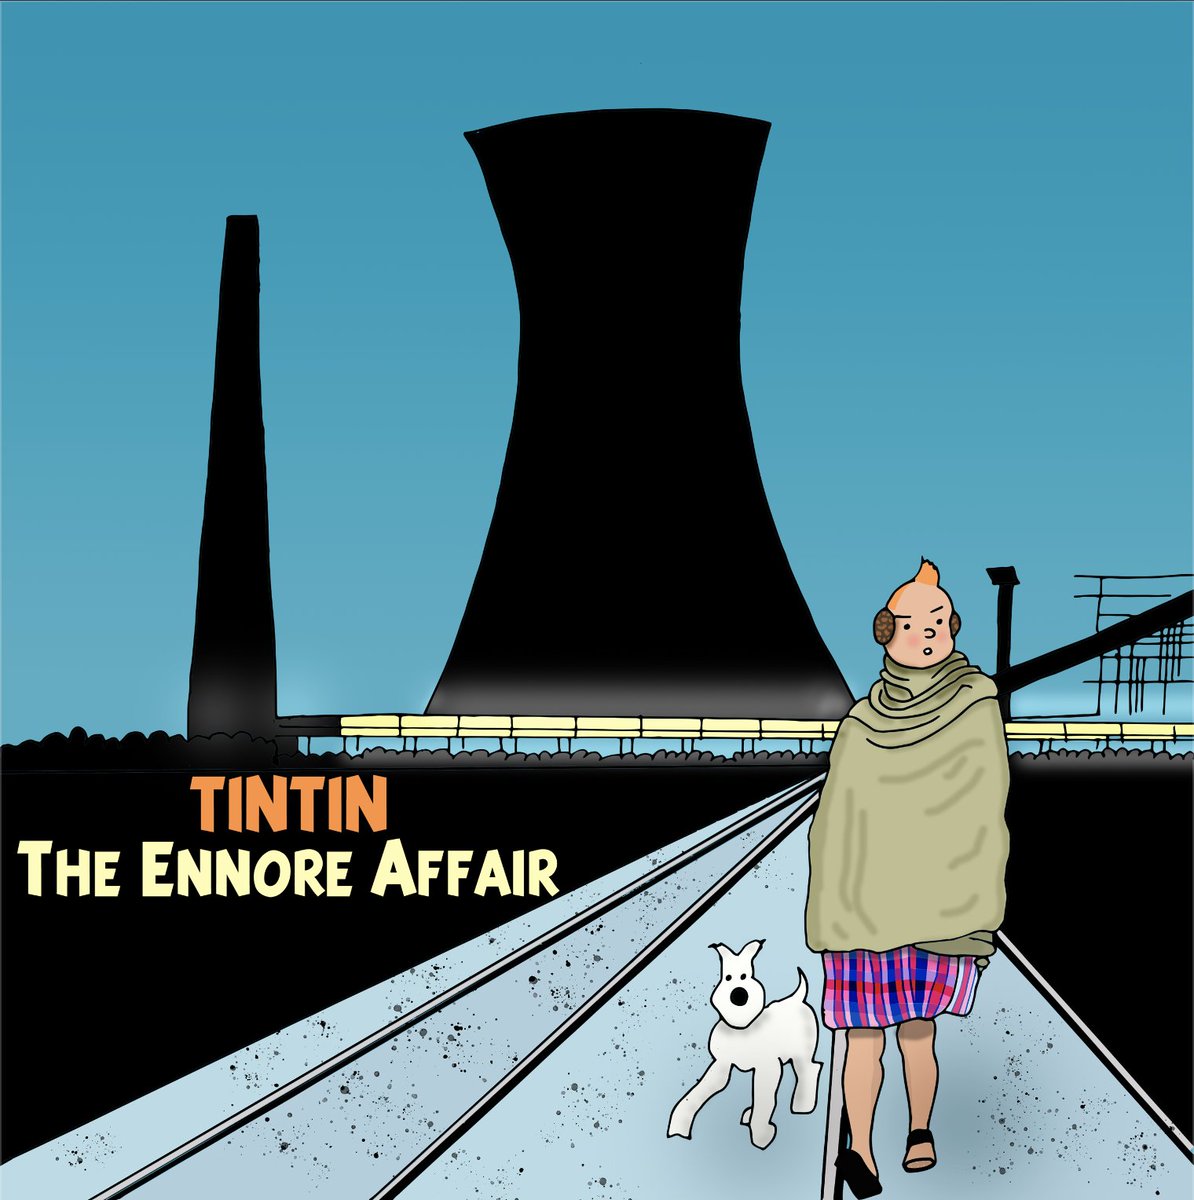 And then I decided to do a Chennai themed Tintin illustration, so I first roughly sketched the broad details I wanted - the old Ennore thermal power station silhouette, Tintin wearing a shawl and earmuffs etc.